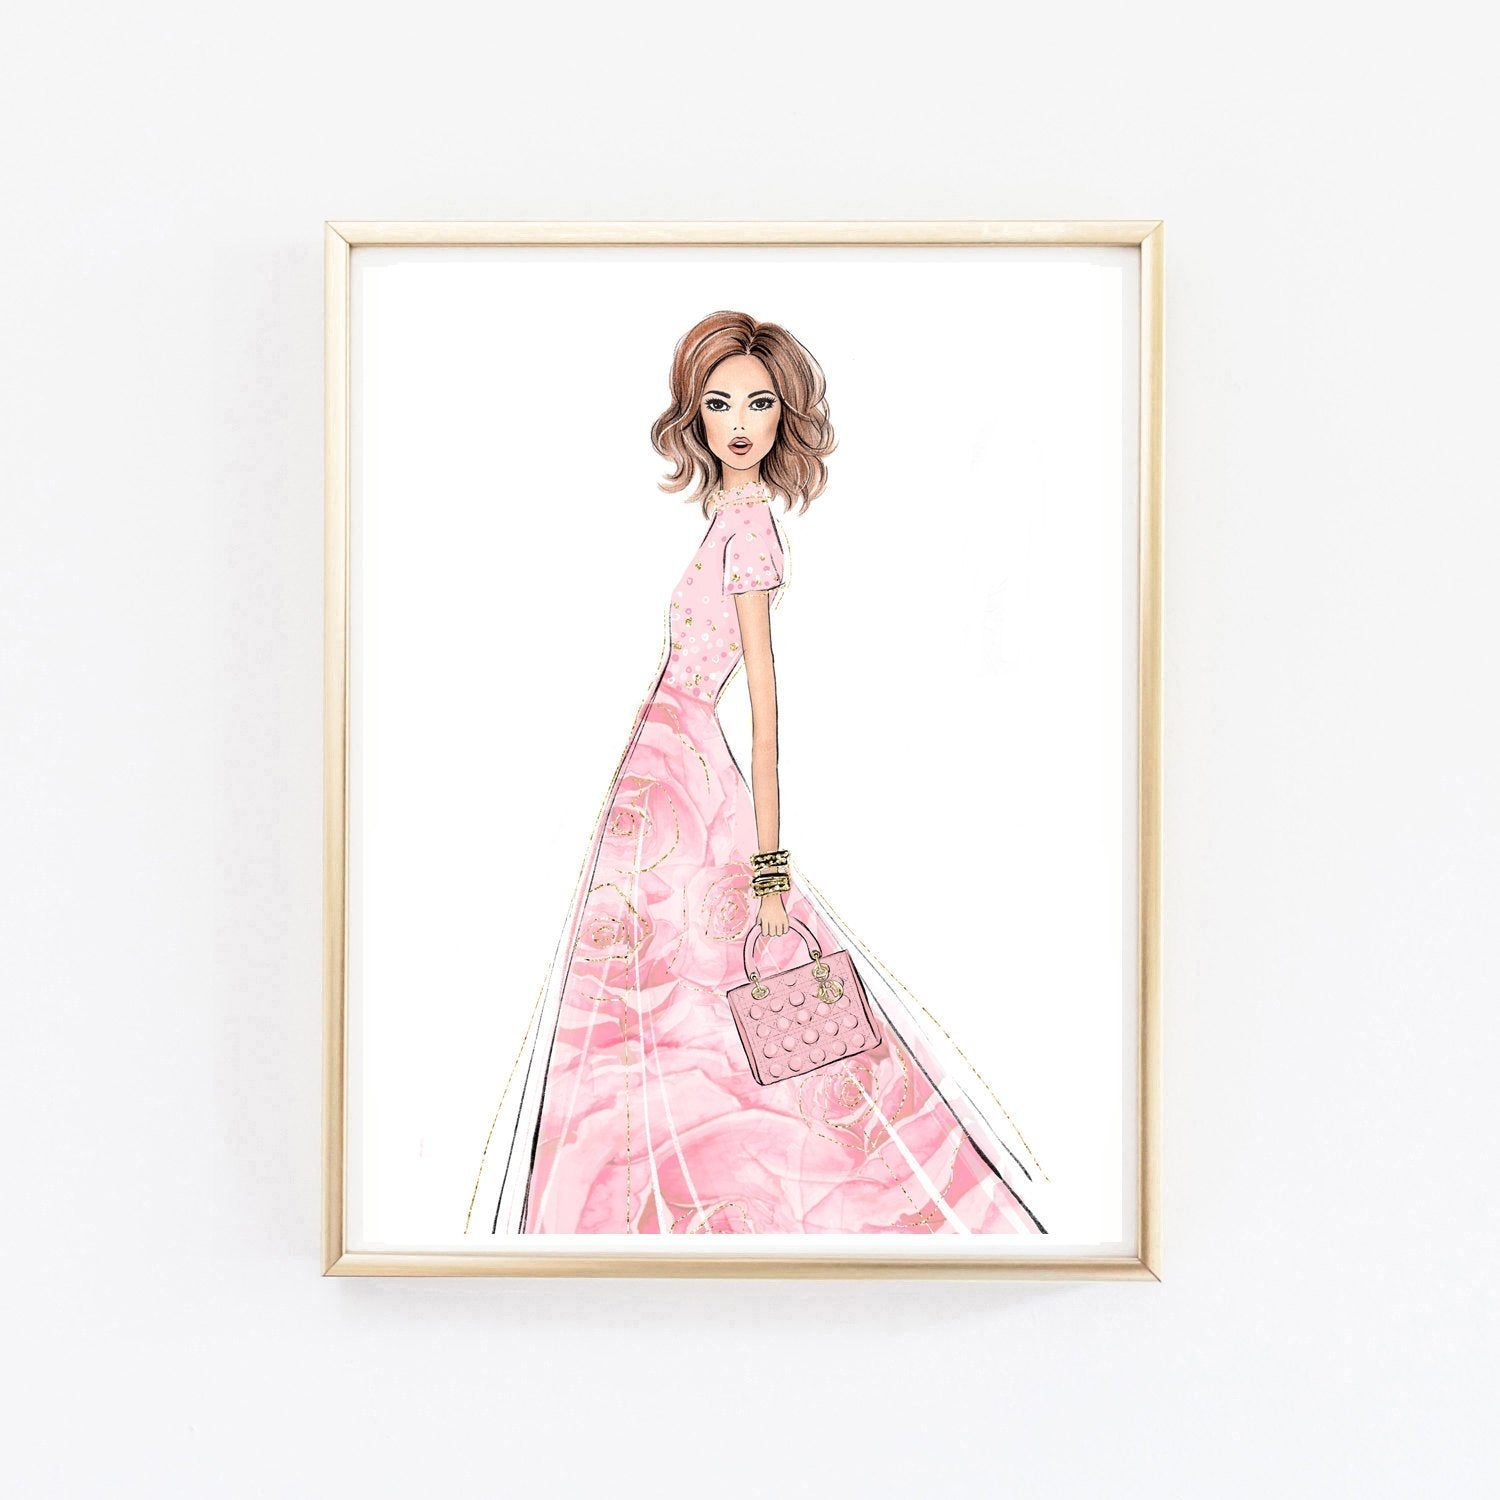 Girl in rose gown art print fashion illustration